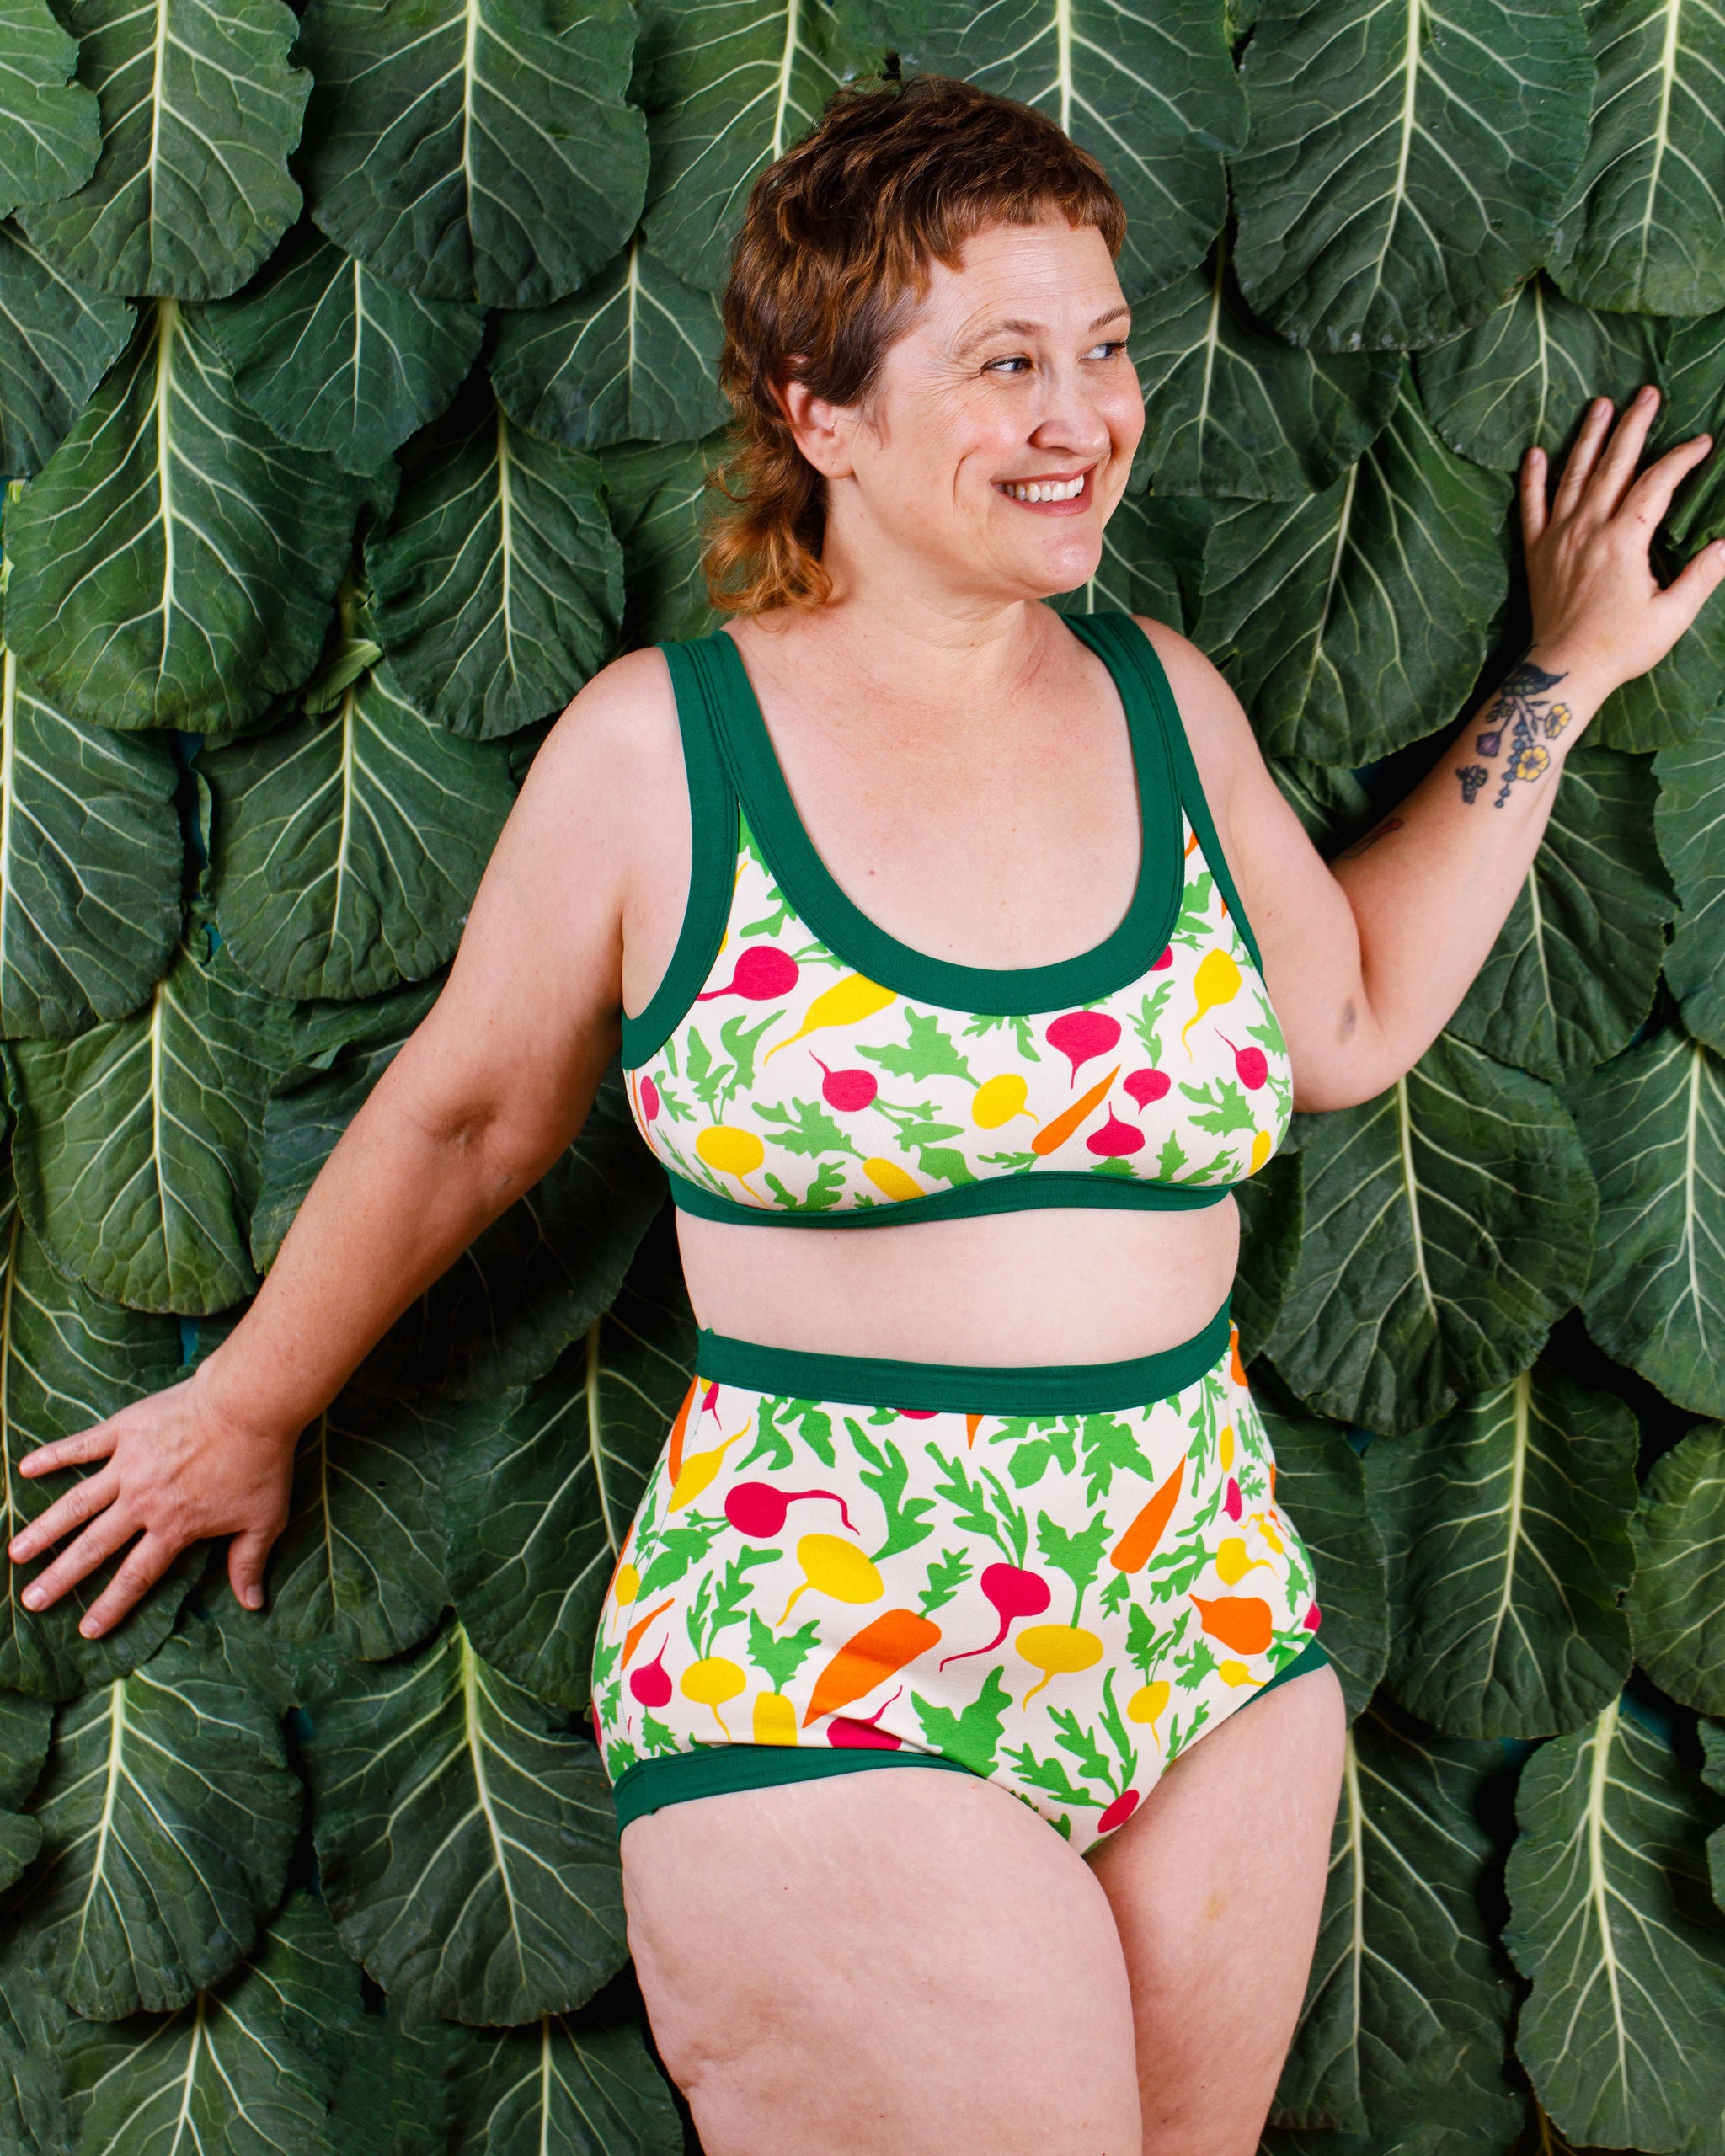 Model smiling wearing Thunderants Sky Rise style underwear and matching Bralette in Root Veggies print - yellow, orange, pink, and green vegetables.